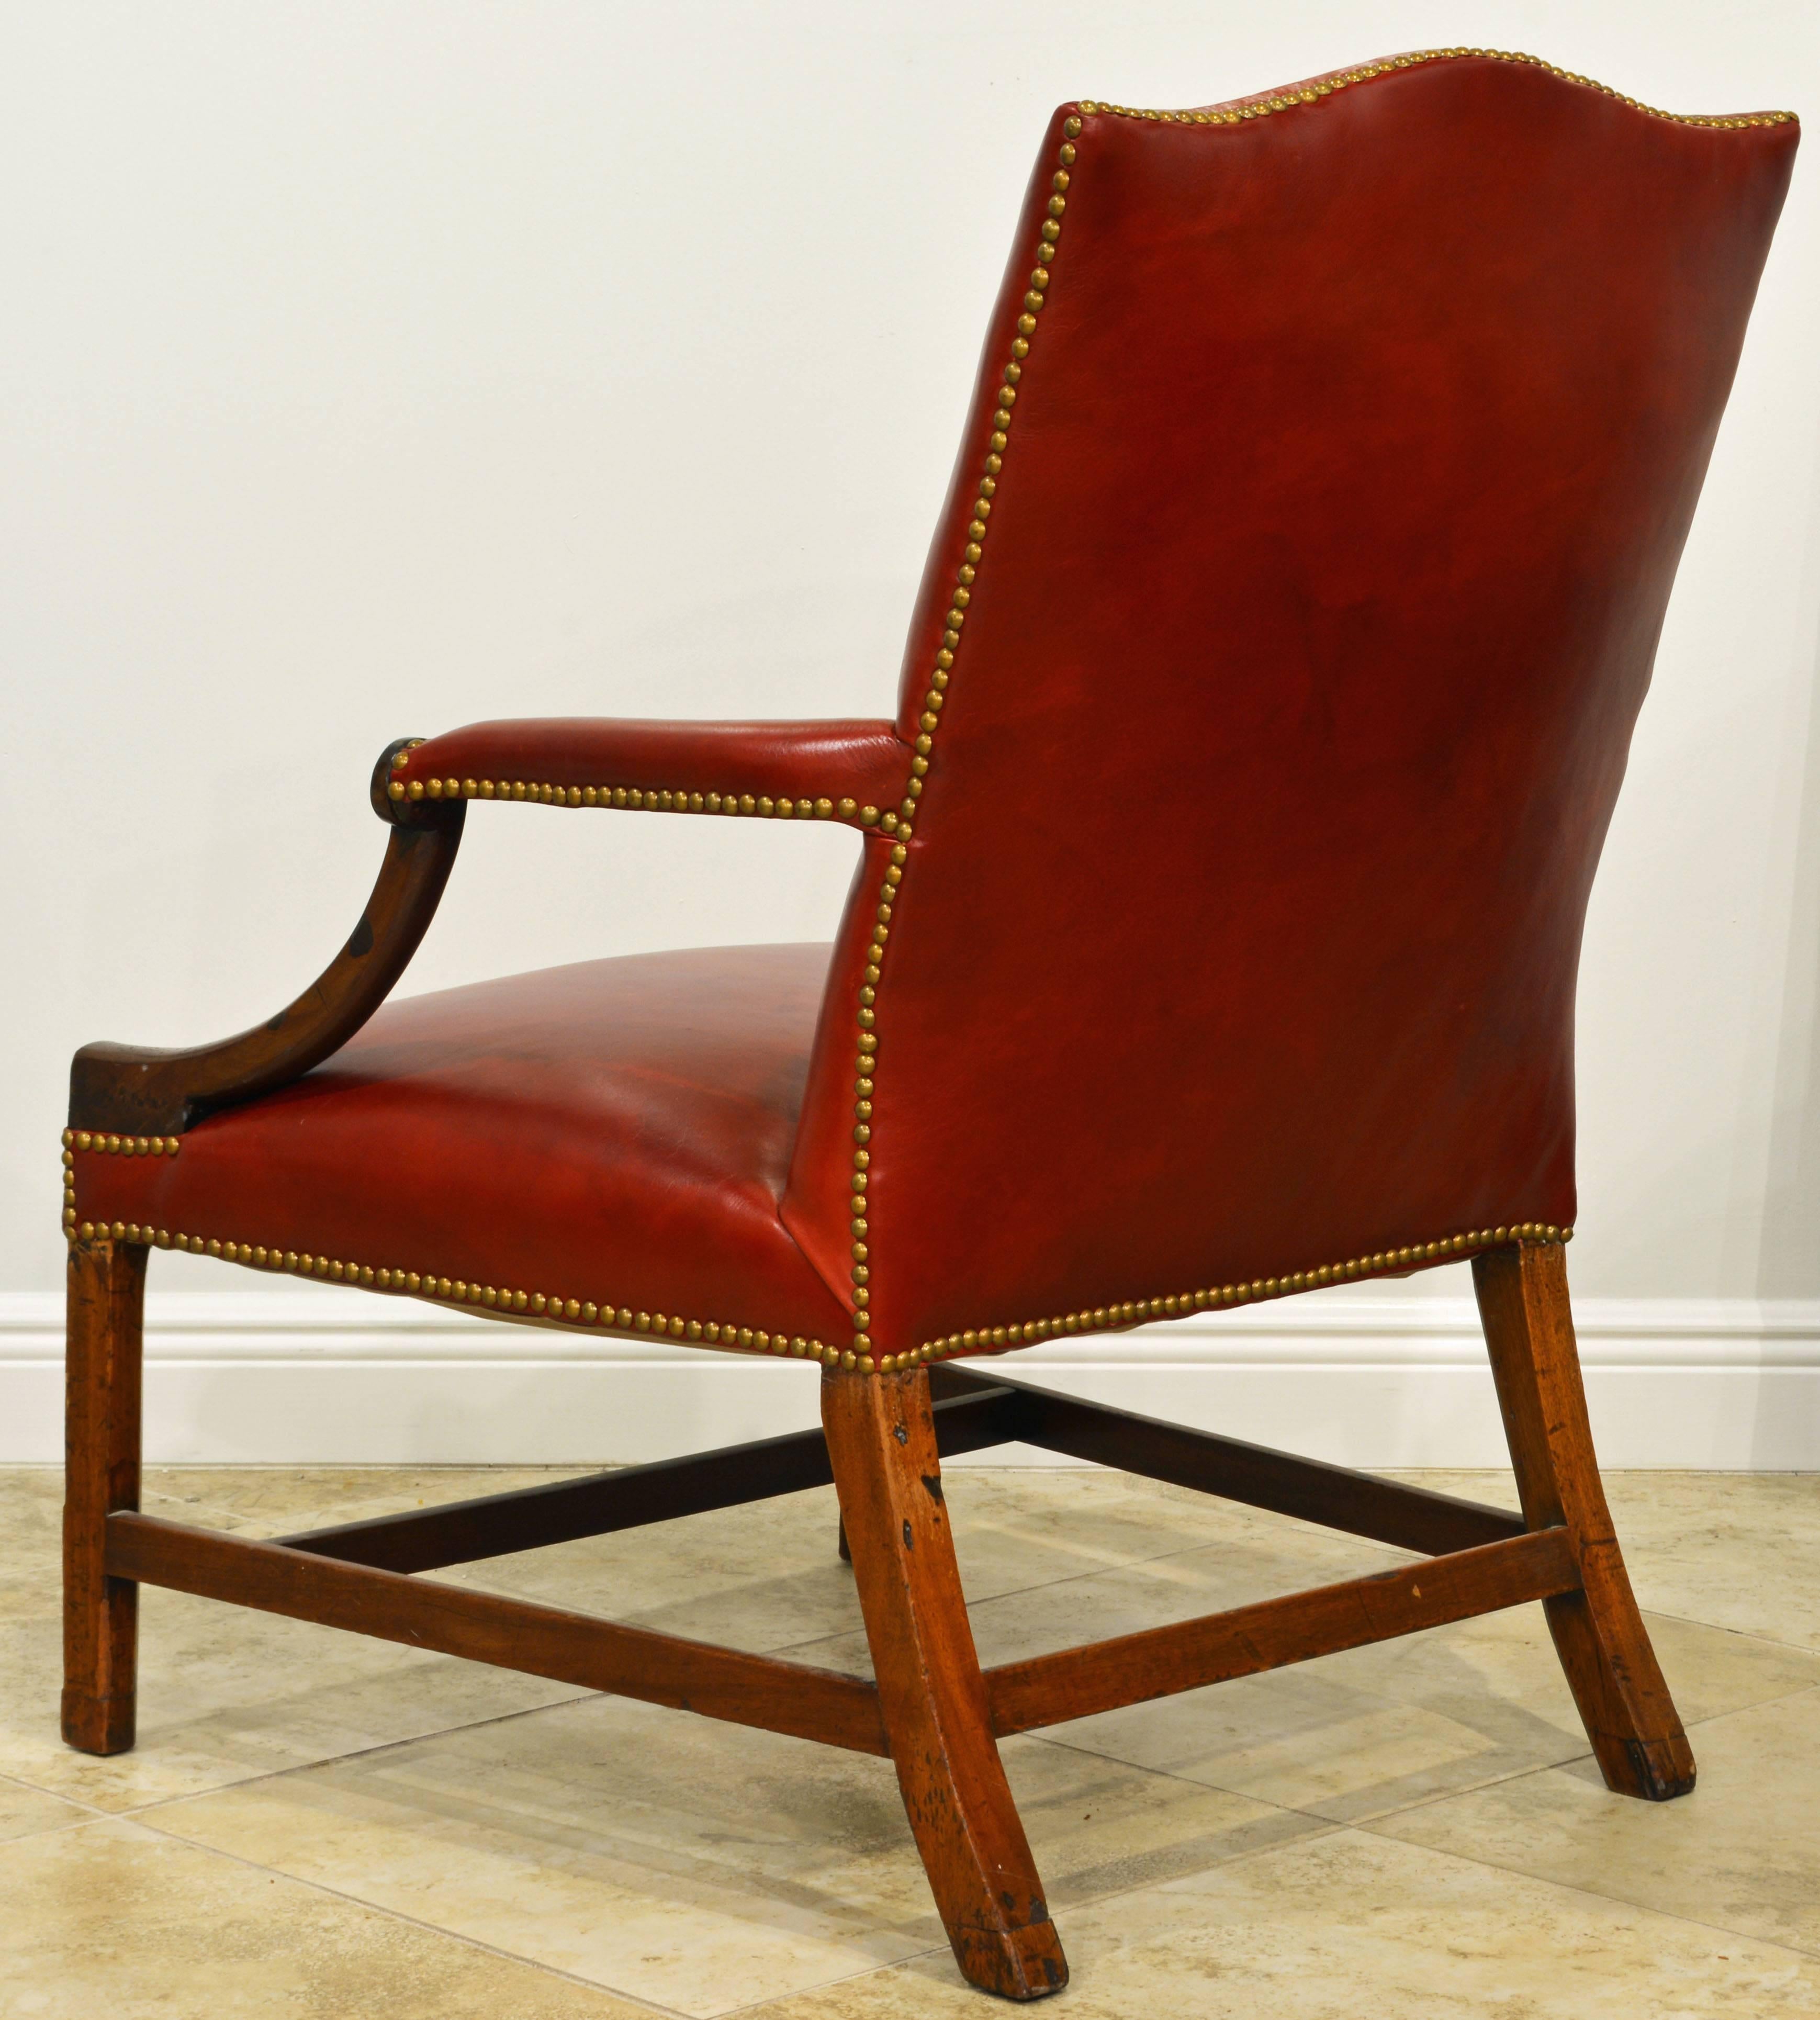 English Good 19th Century Mahogany and Red Leather and Nailhead Trimmed Lolling Chair